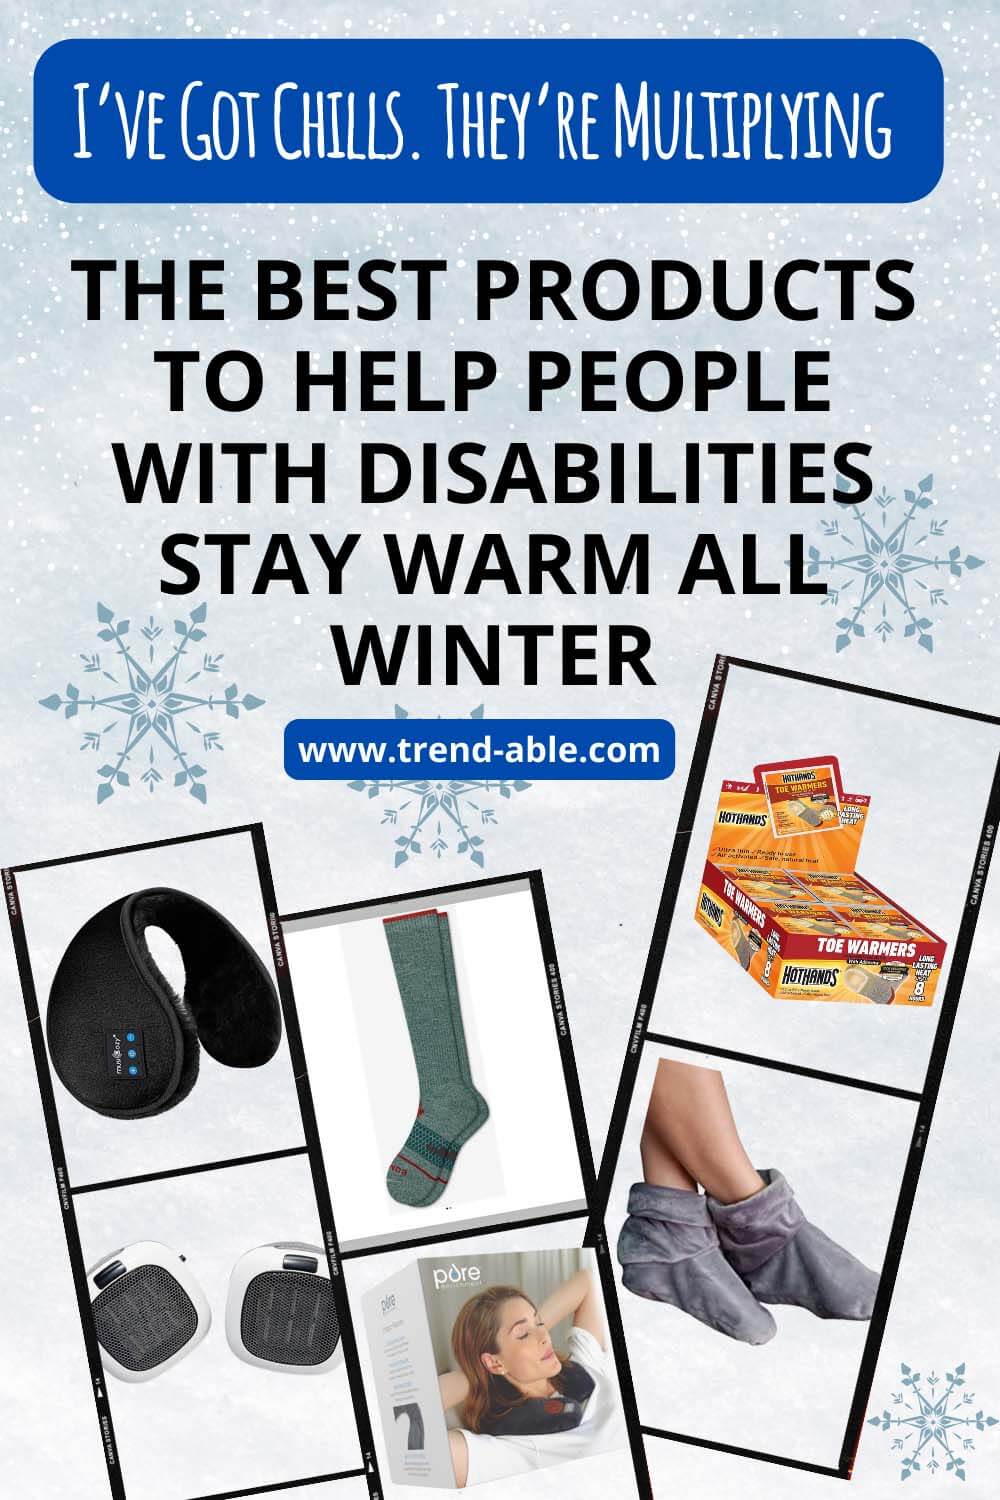 COLD WEATHER, NEUROPATHY